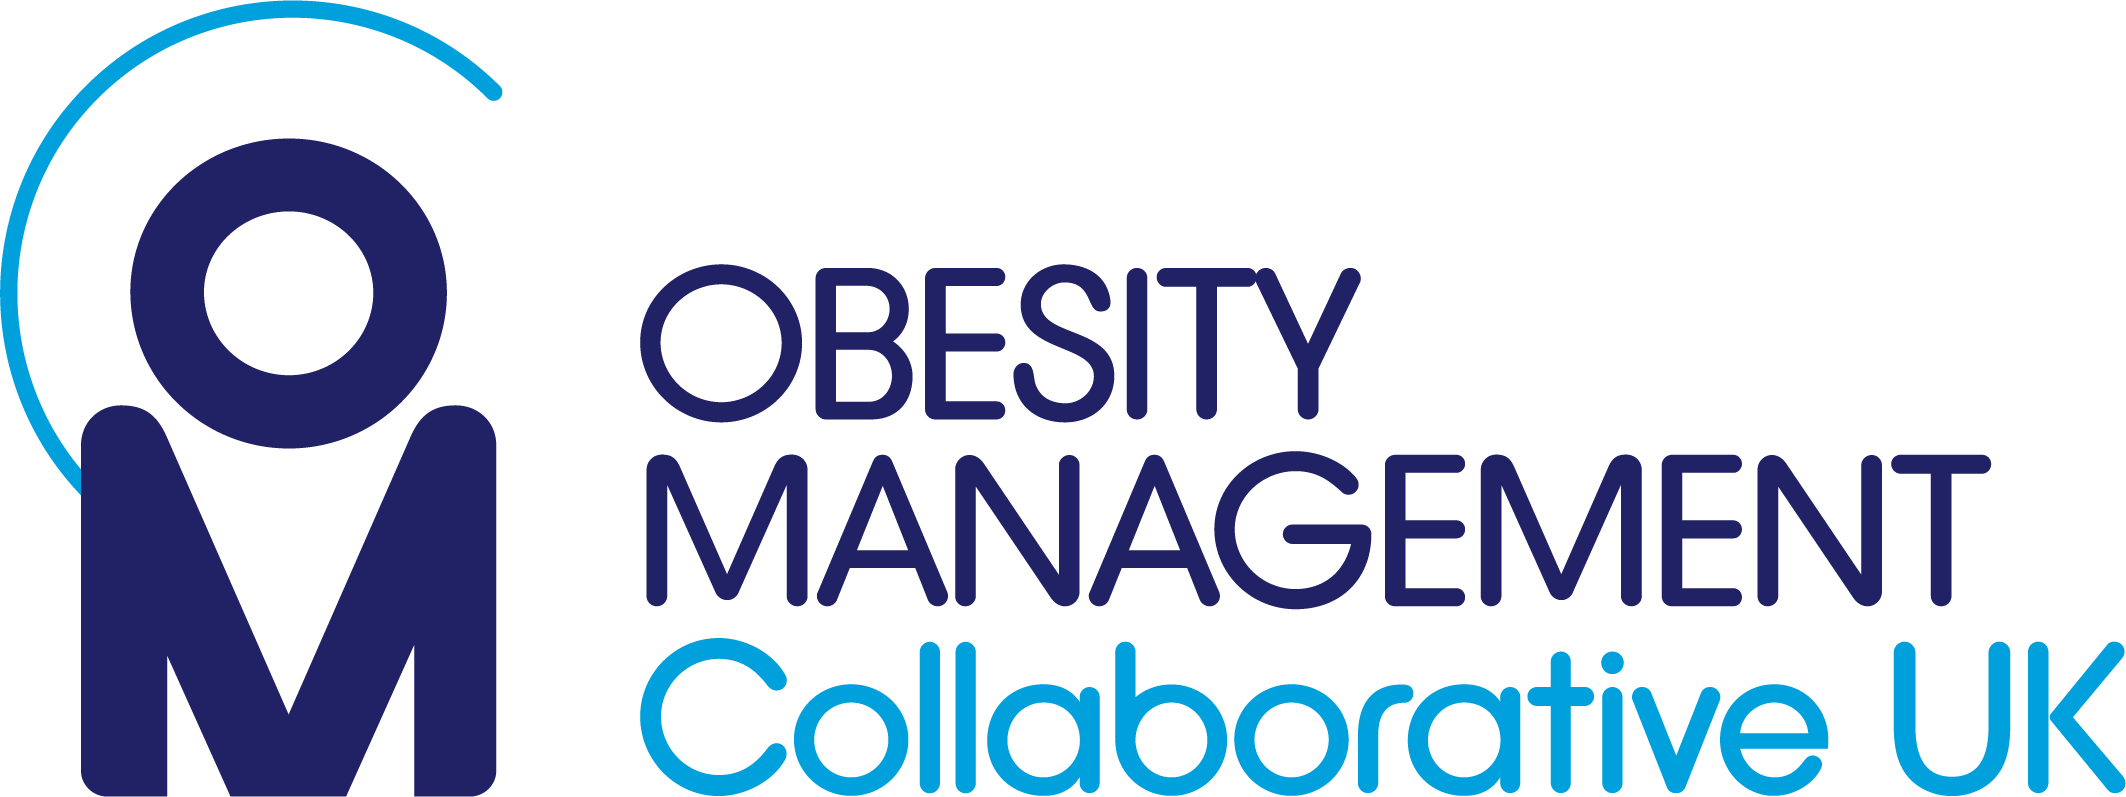 logo for the Obesity Management Collaborative UK